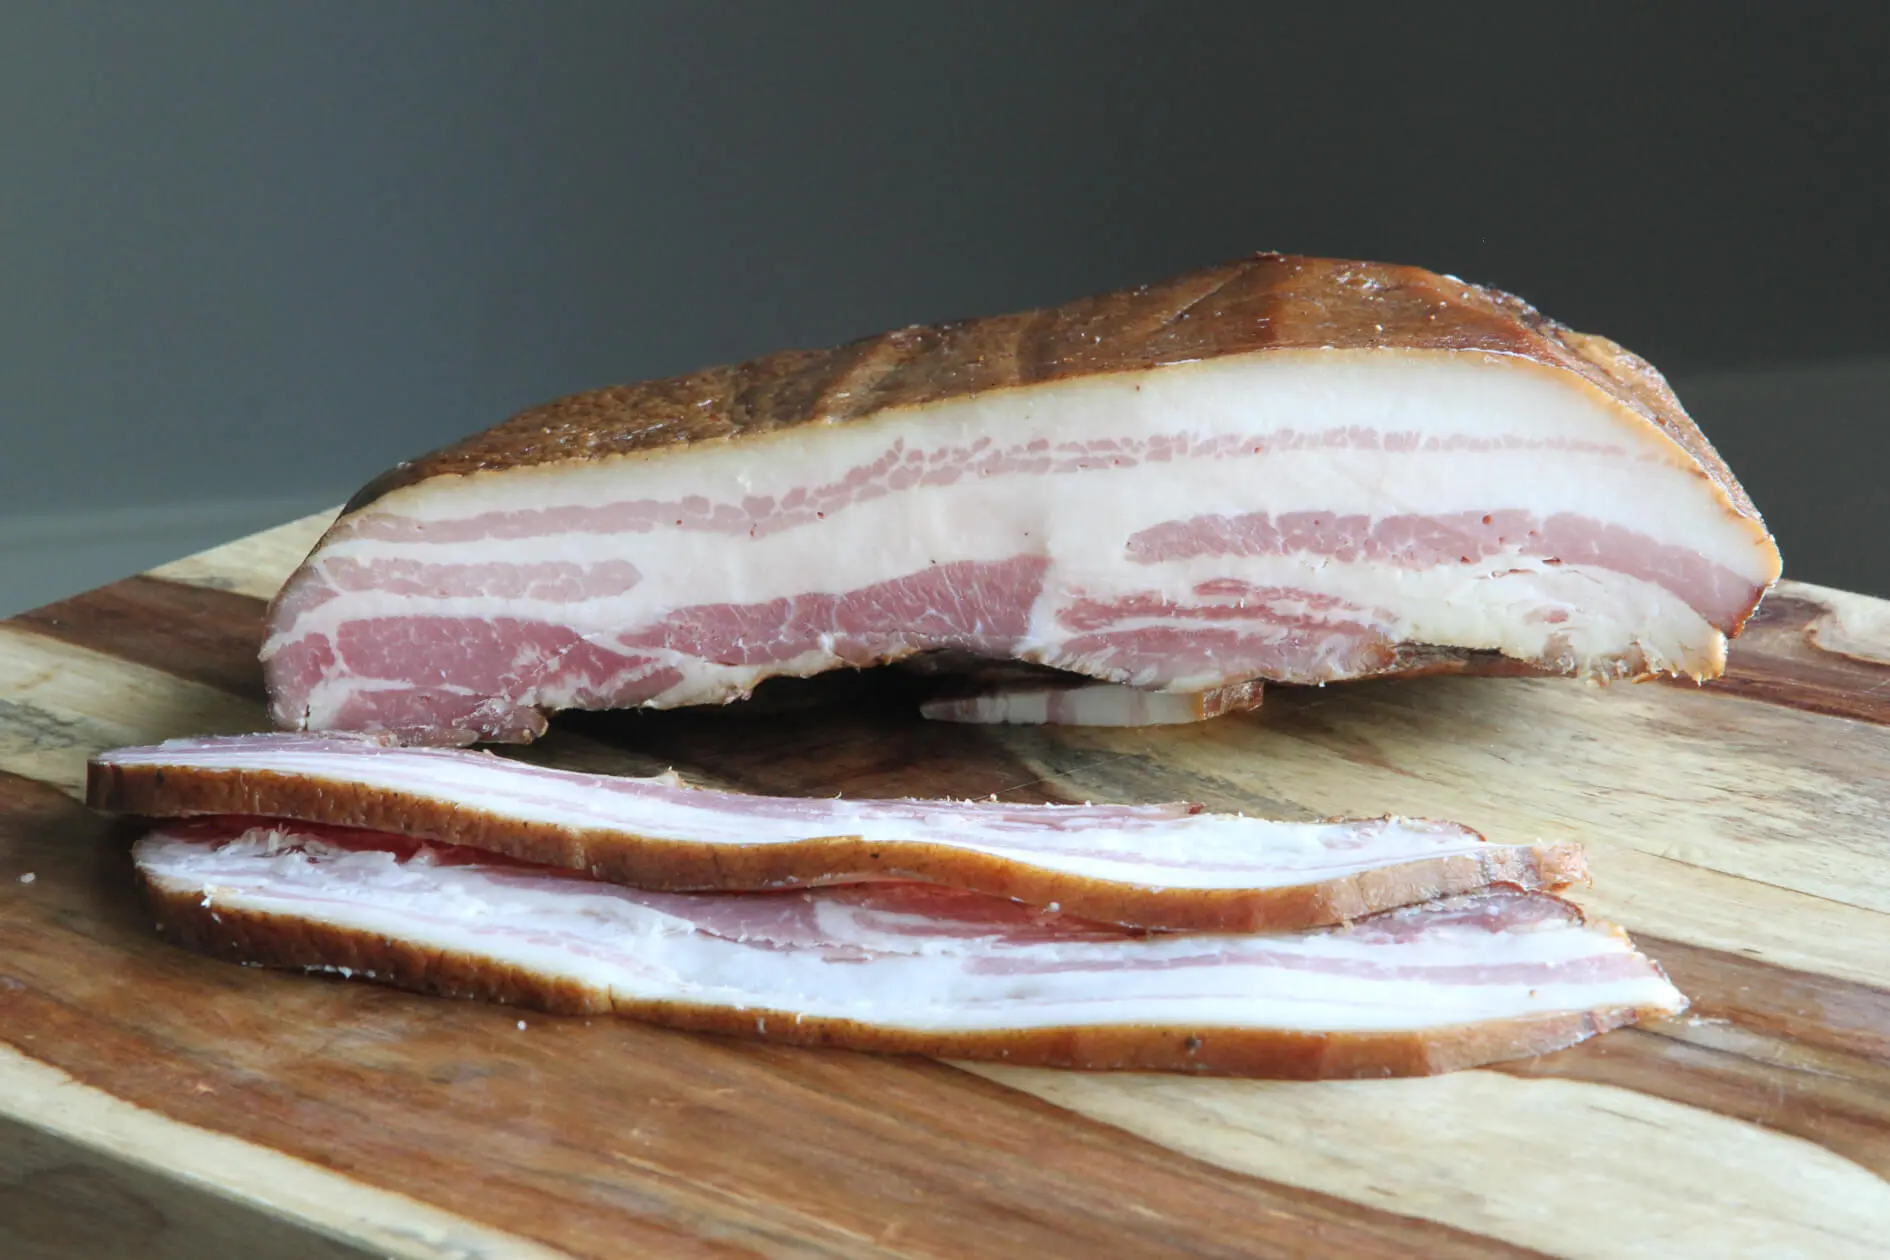 smoked belly bacon - Is smoked pork belly bacon